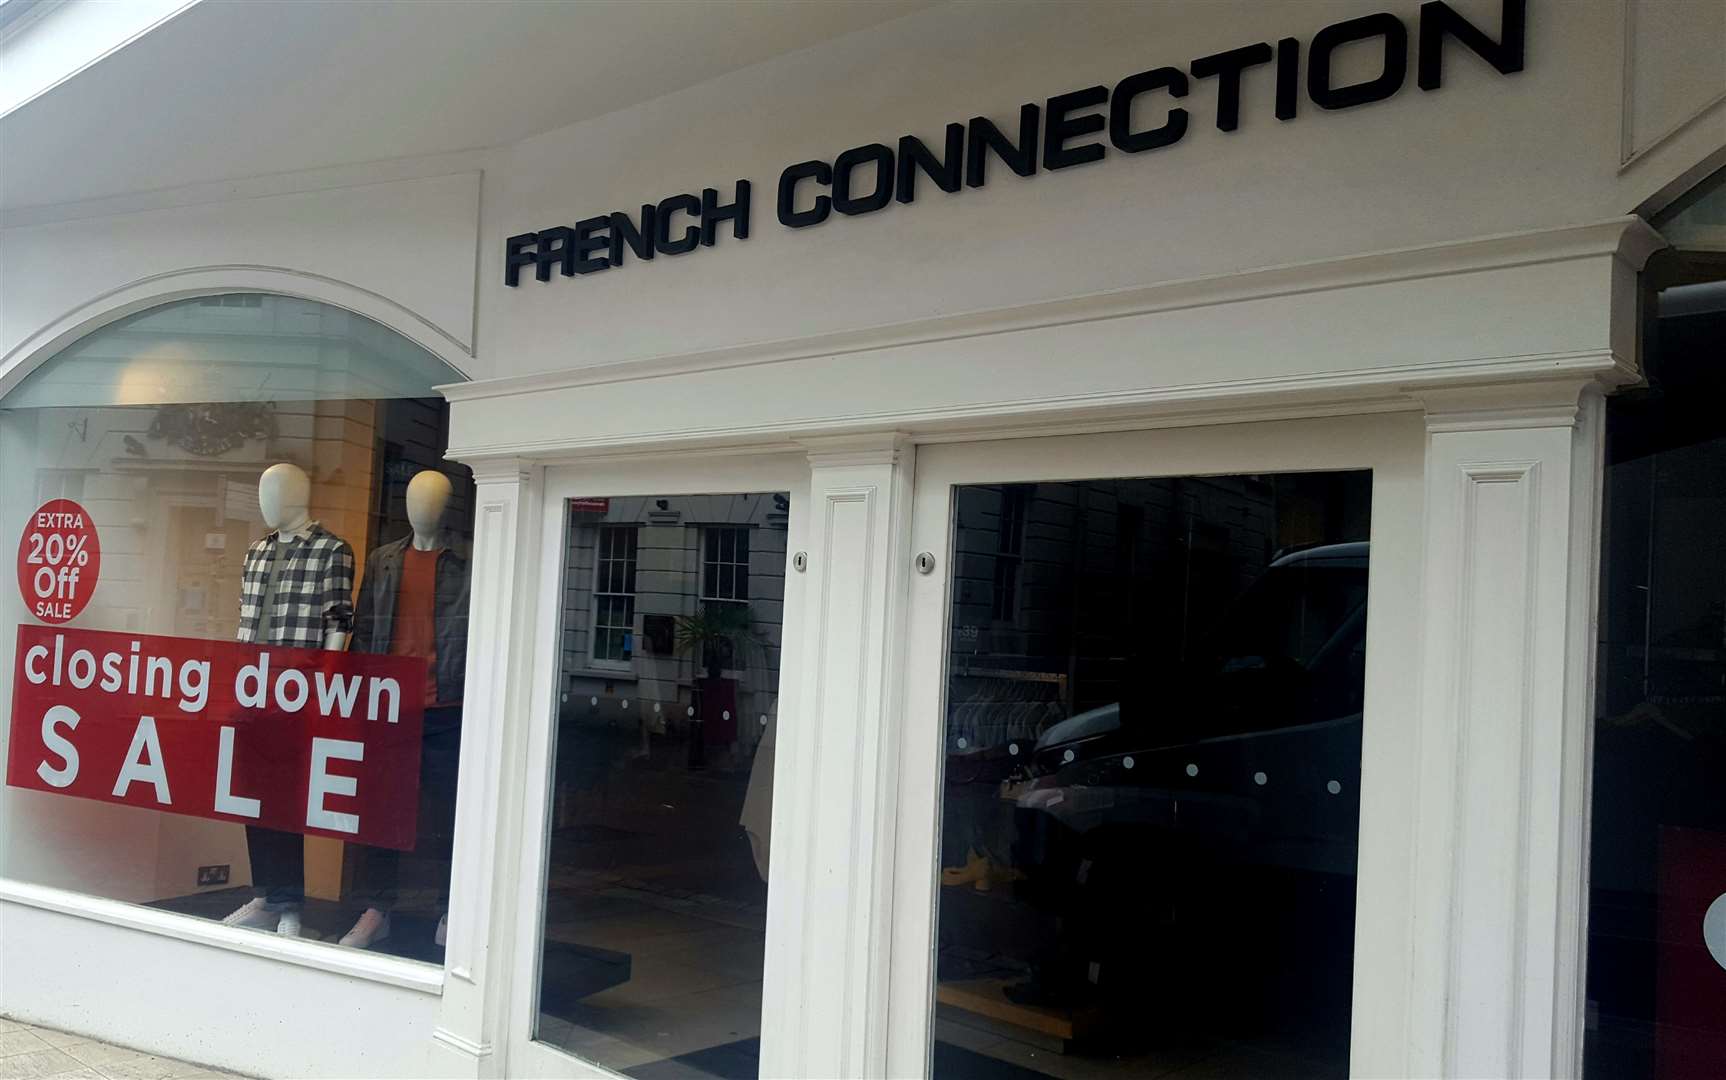 The French Connection unit in Canterbury may be welcoming a new restaurant